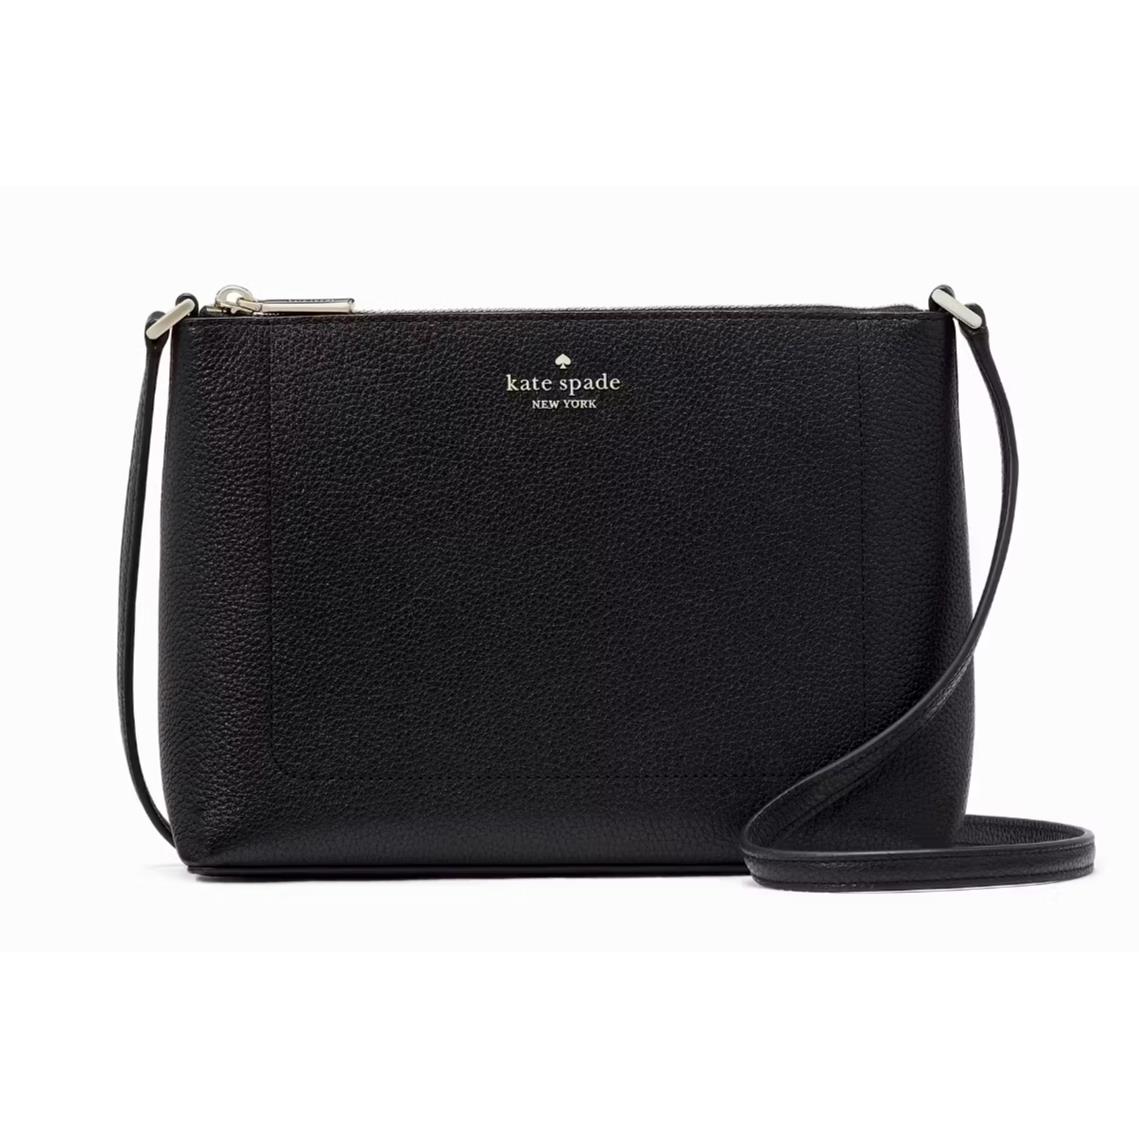 New Kate Spade Leila Crossbody Pebble Leather Black with Dust Bag